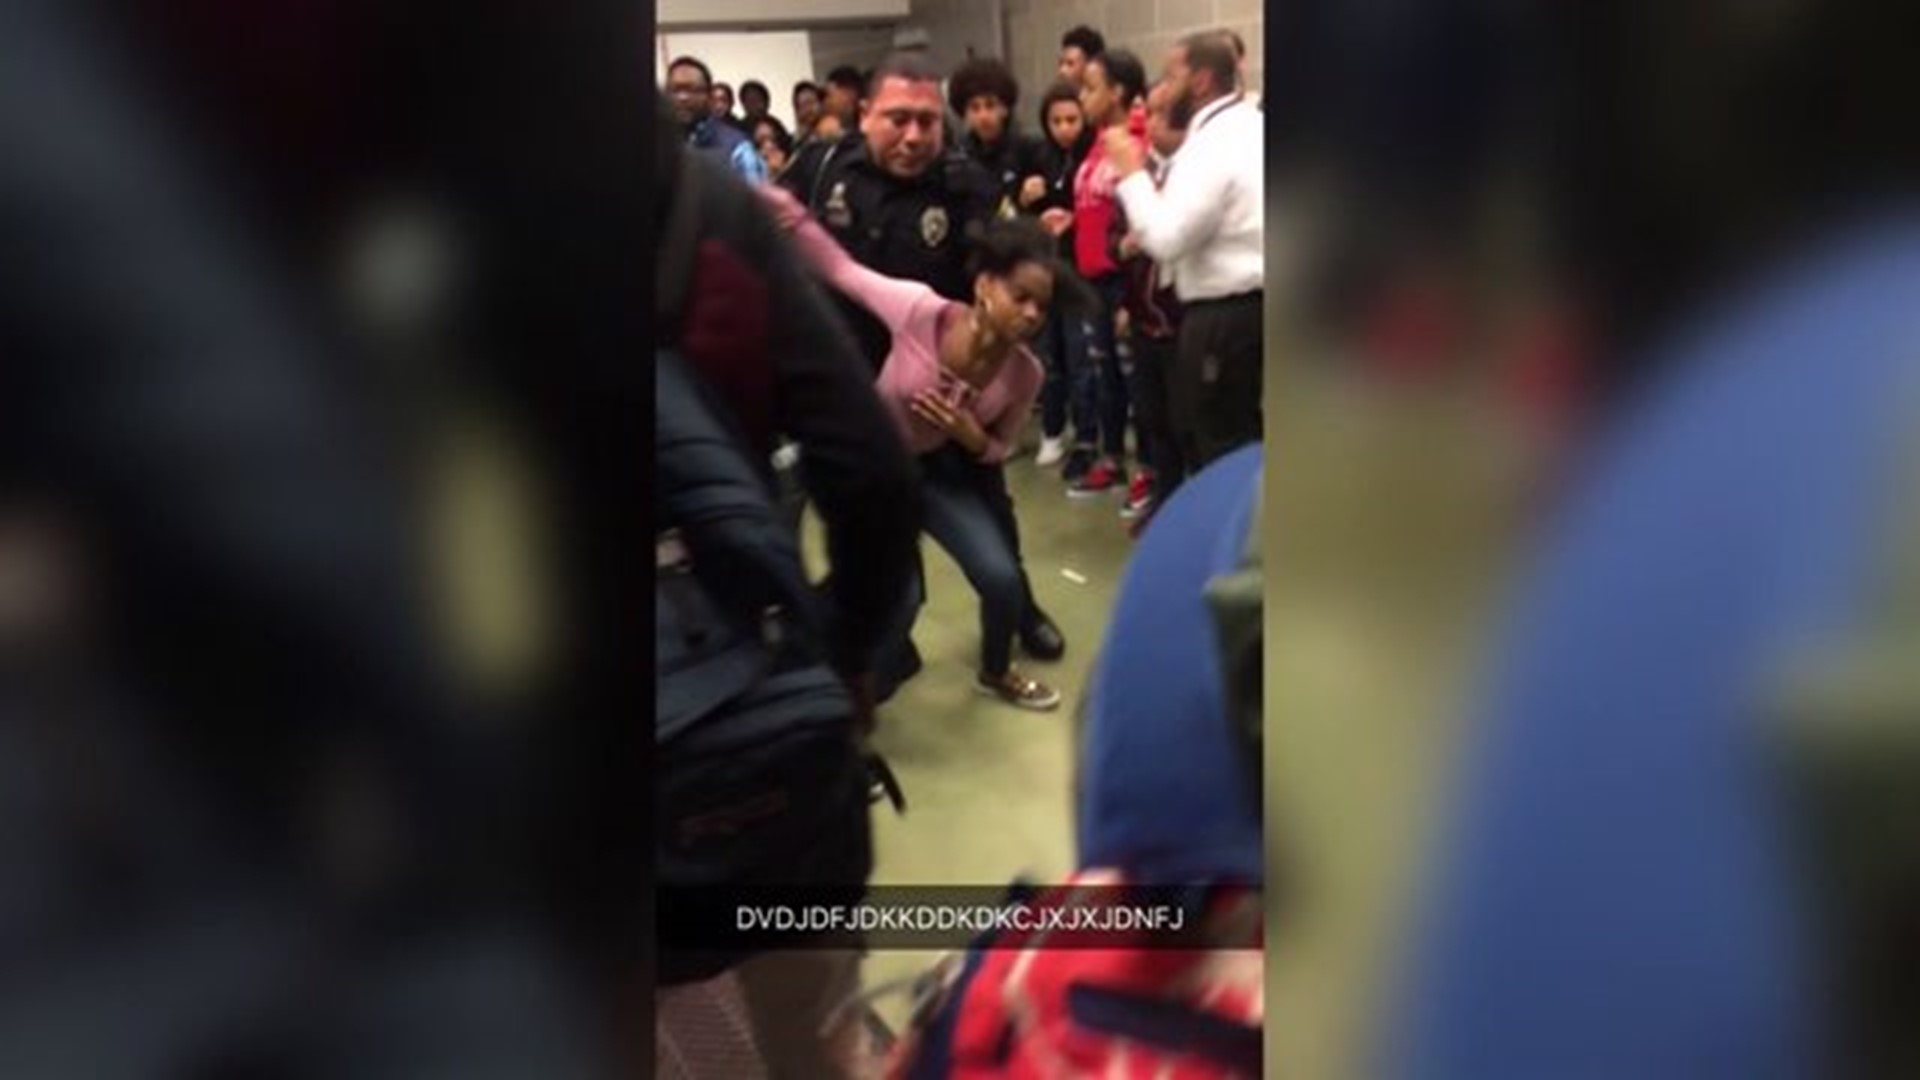 Video shows student being thrown to the floor by cop